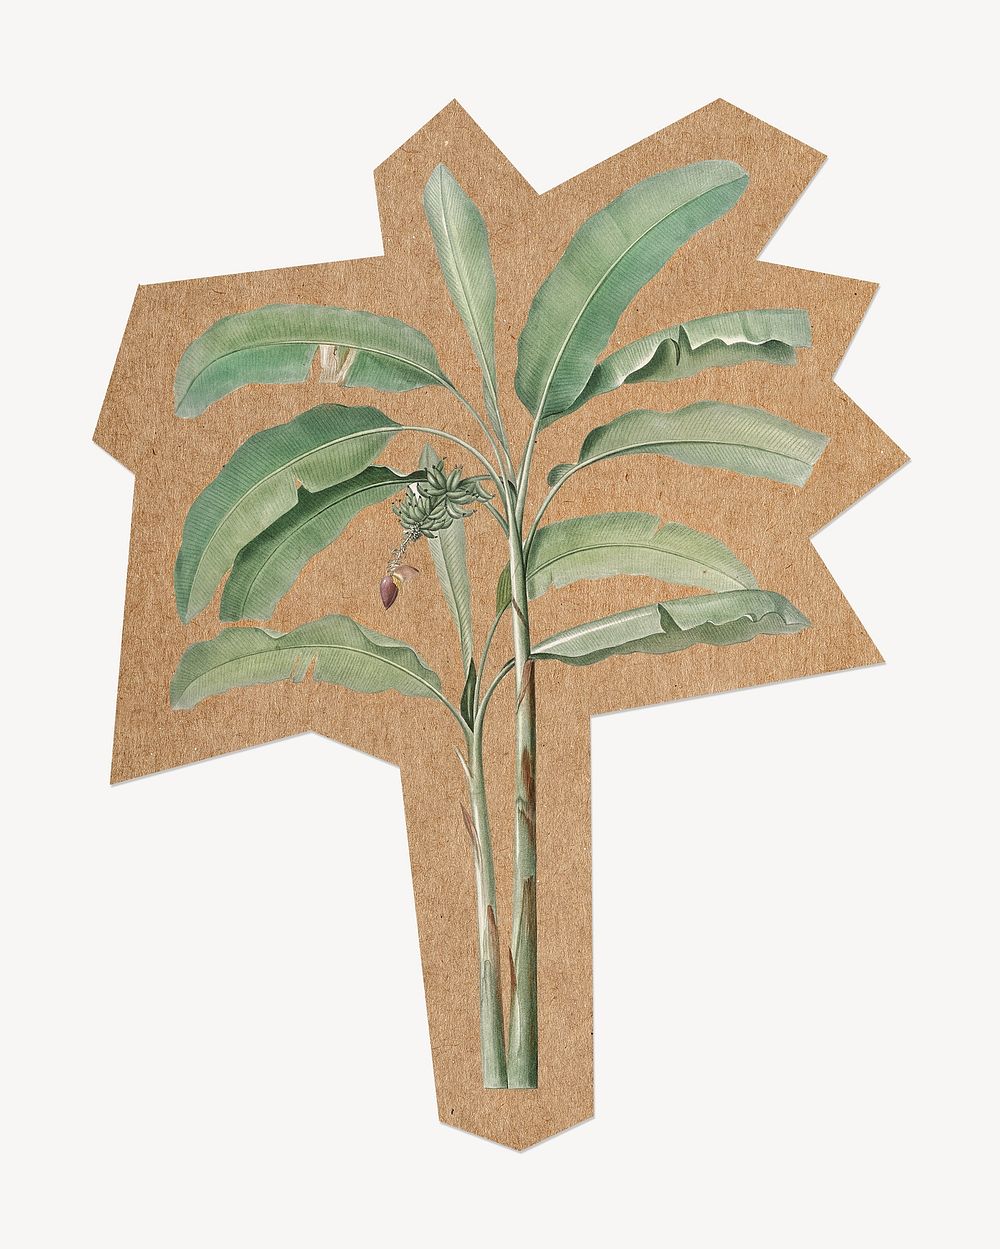 Banana tree, cut out paper element